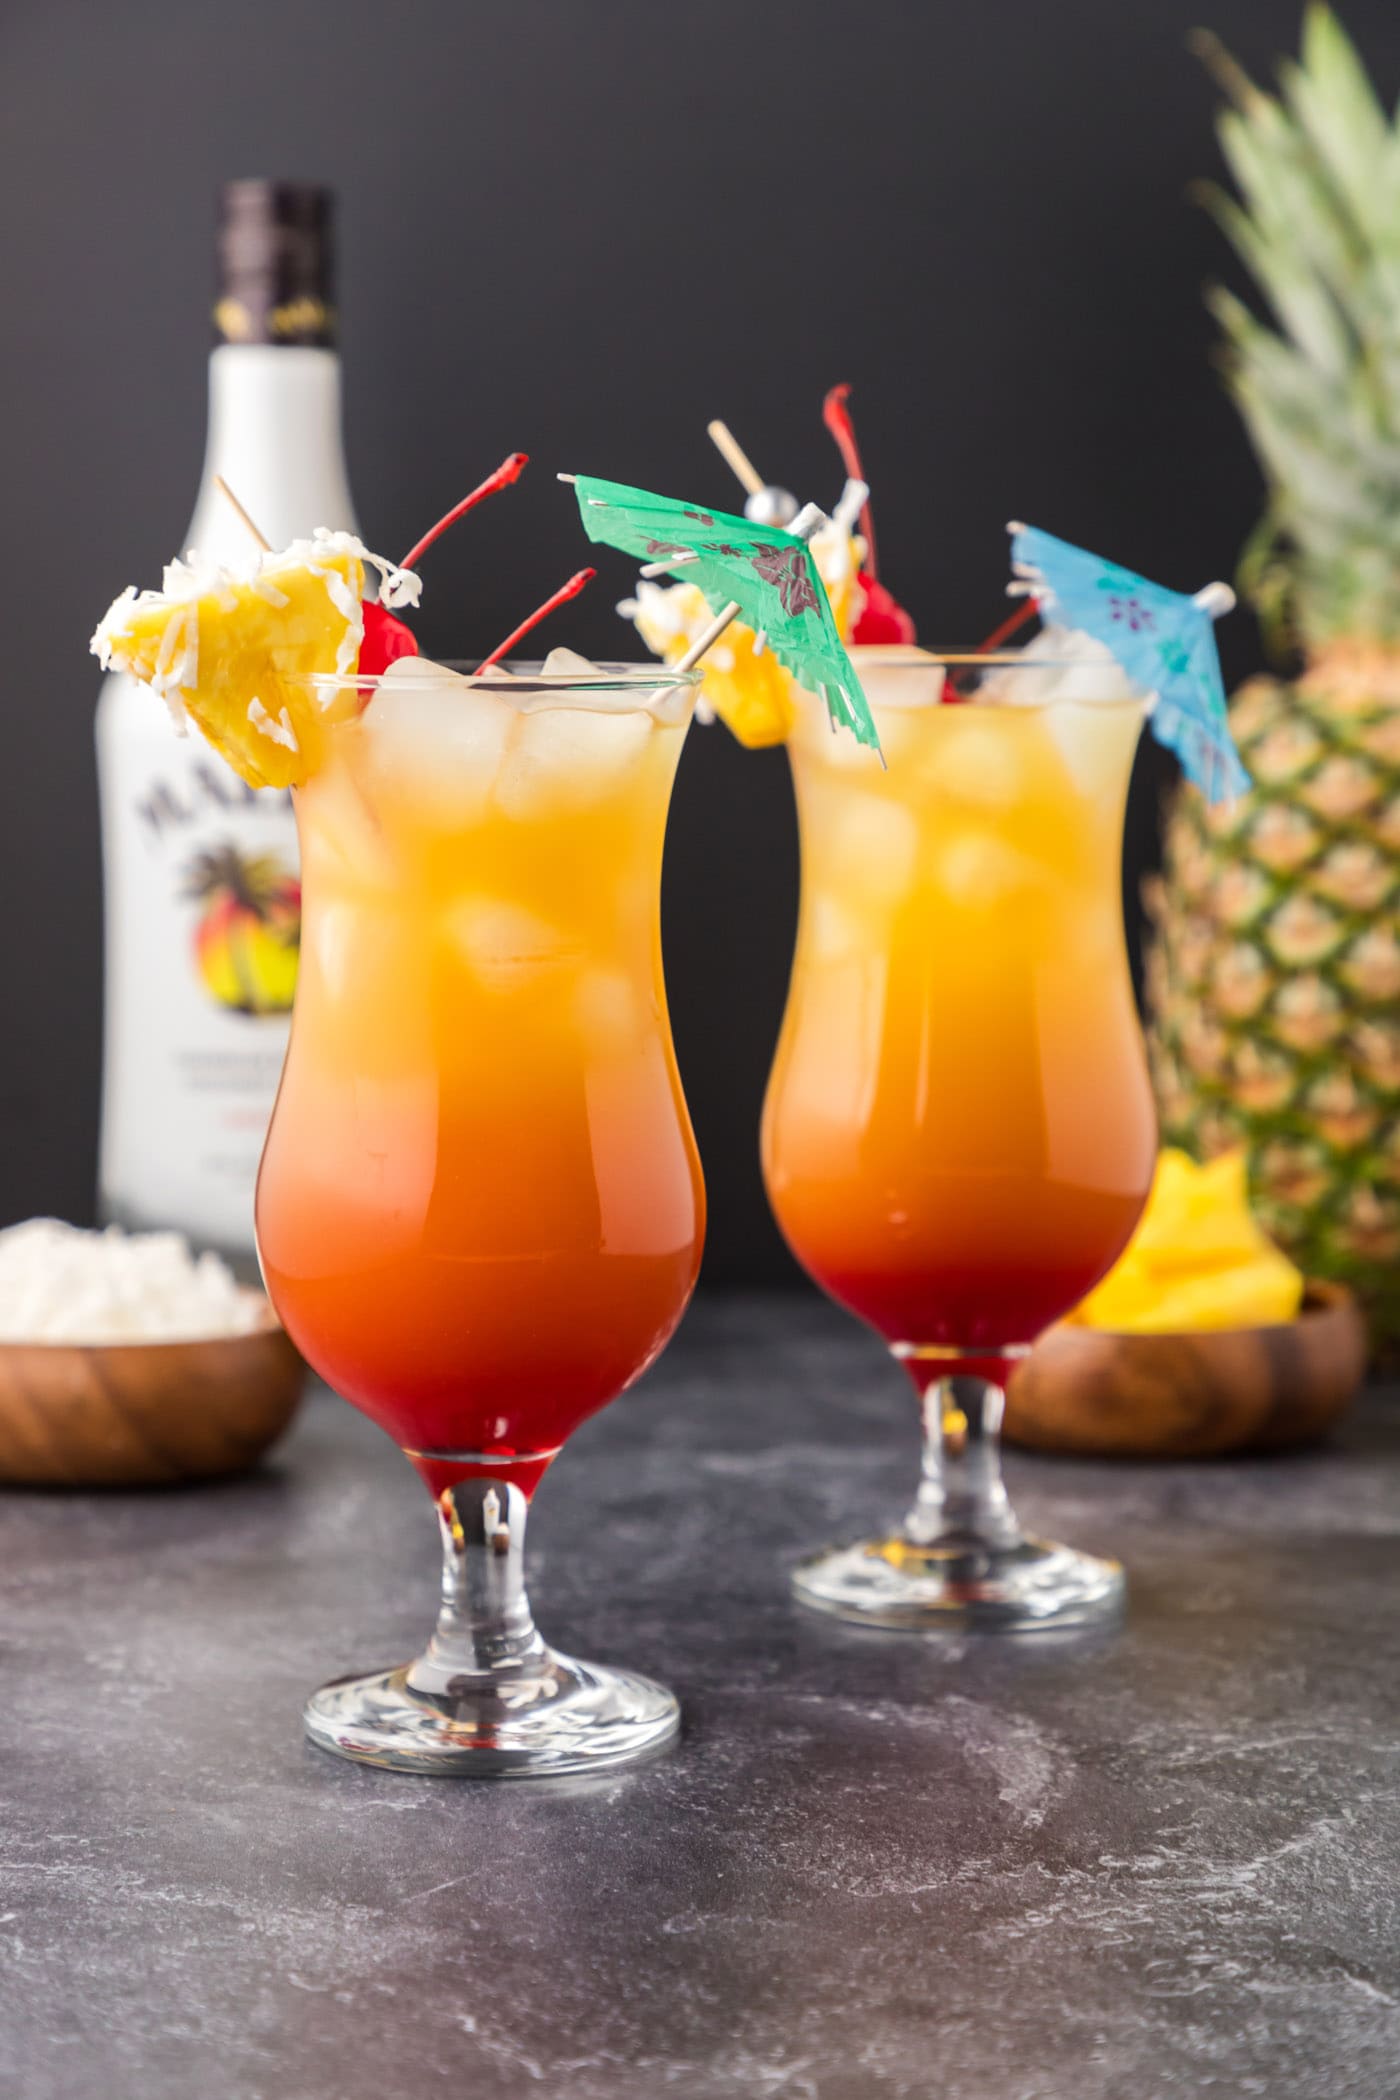 Malibu sunset cocktails with pineapple wedge and shredded coconut garnish